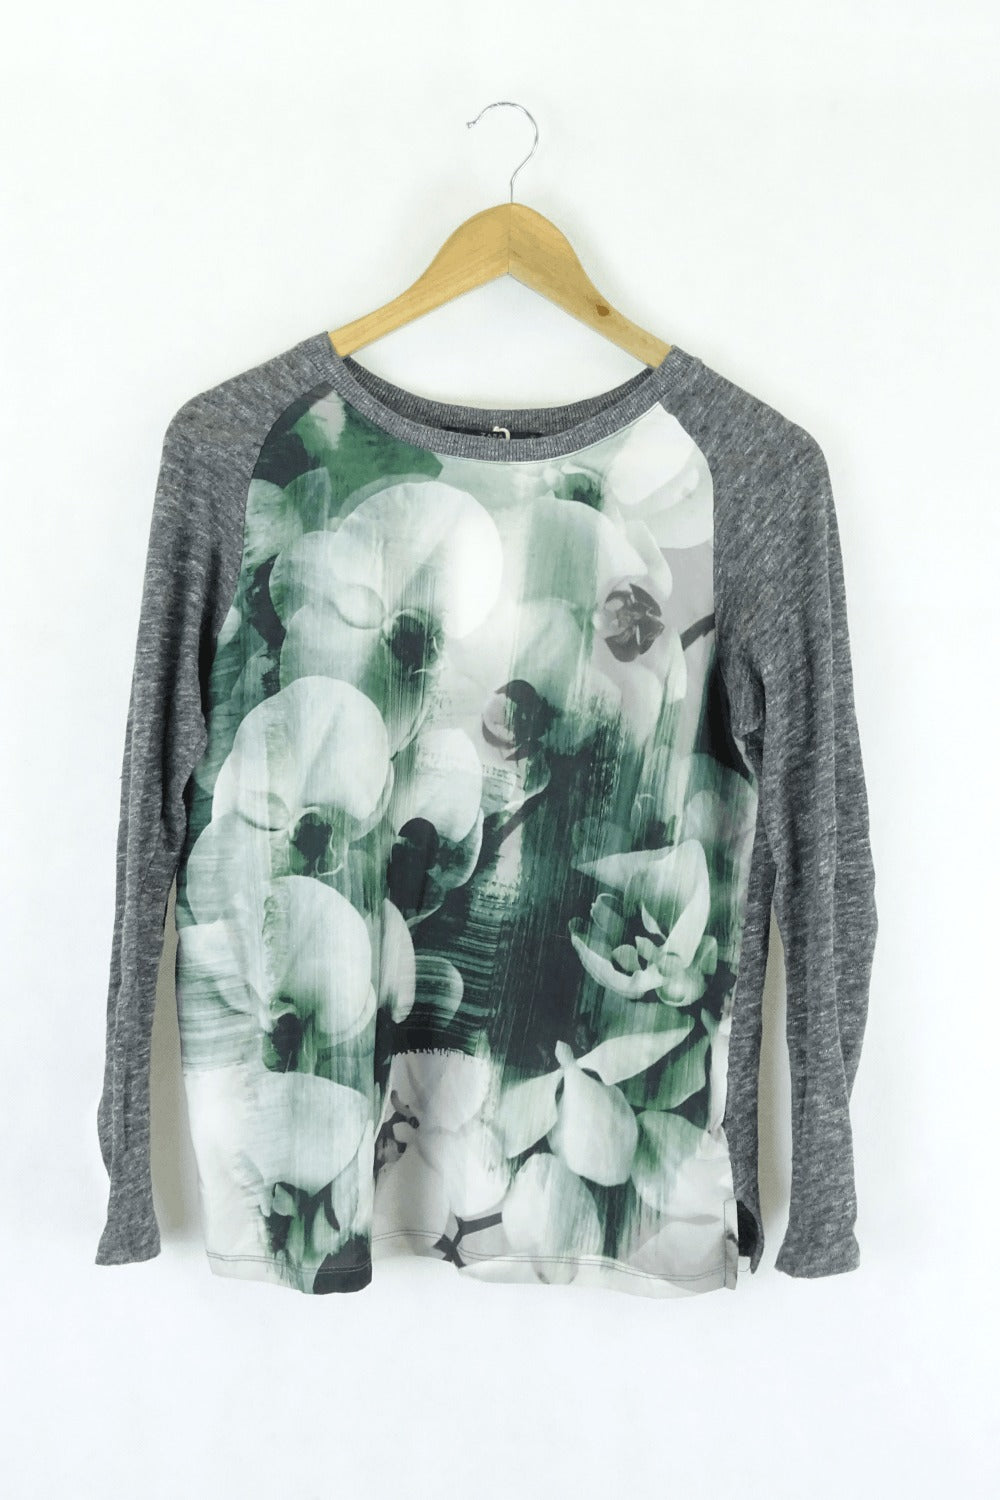 Zara Grey and Green Knit Top S